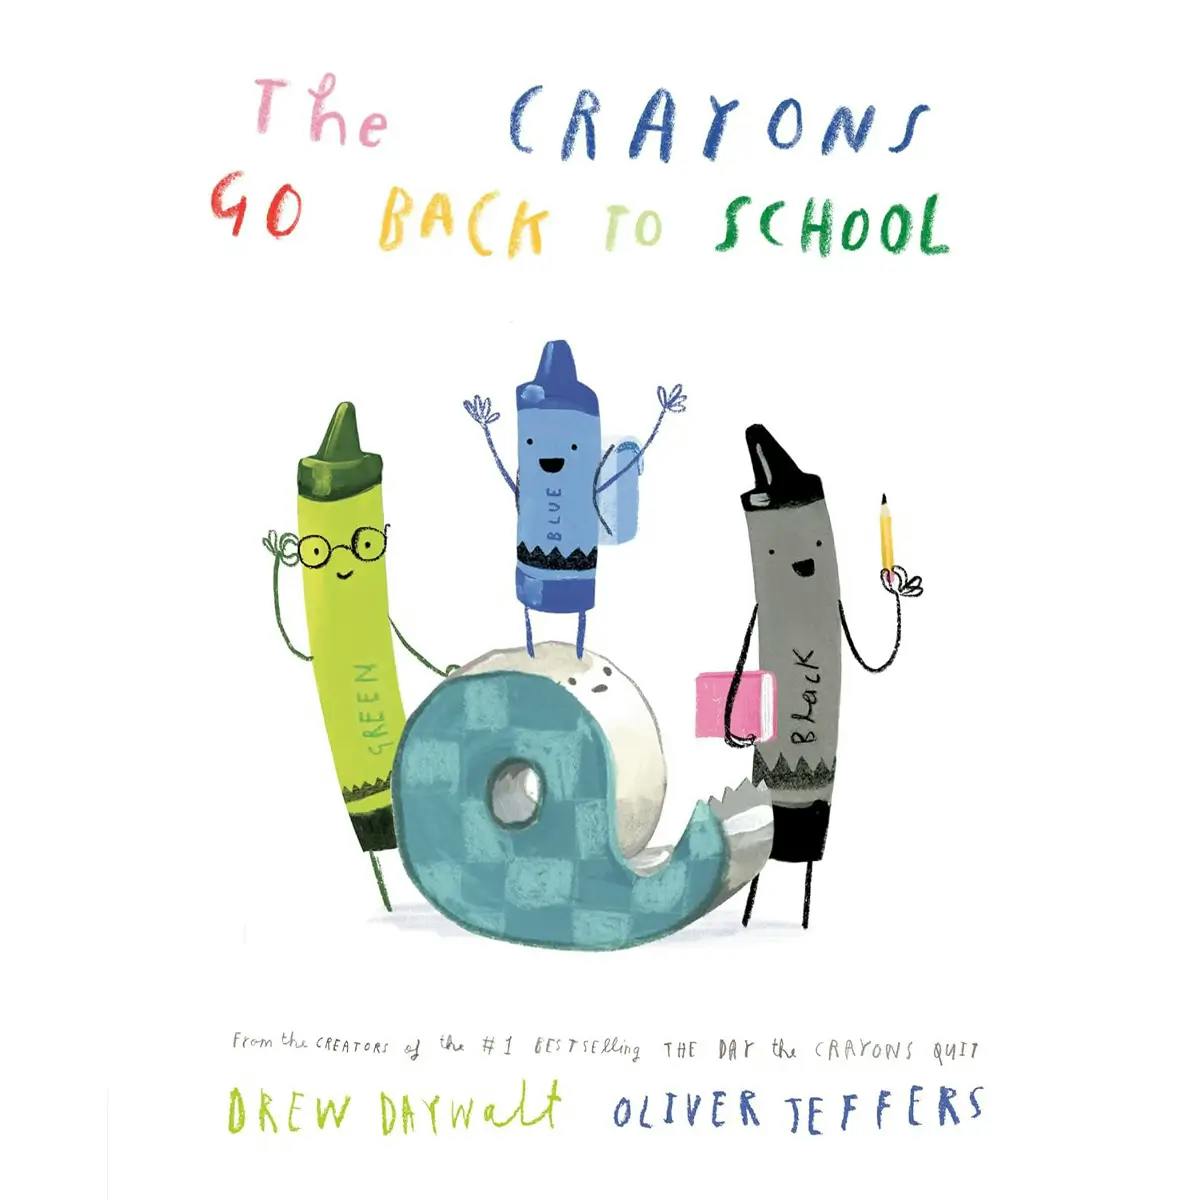 Cover of “The Crayons Go Back to School” book.